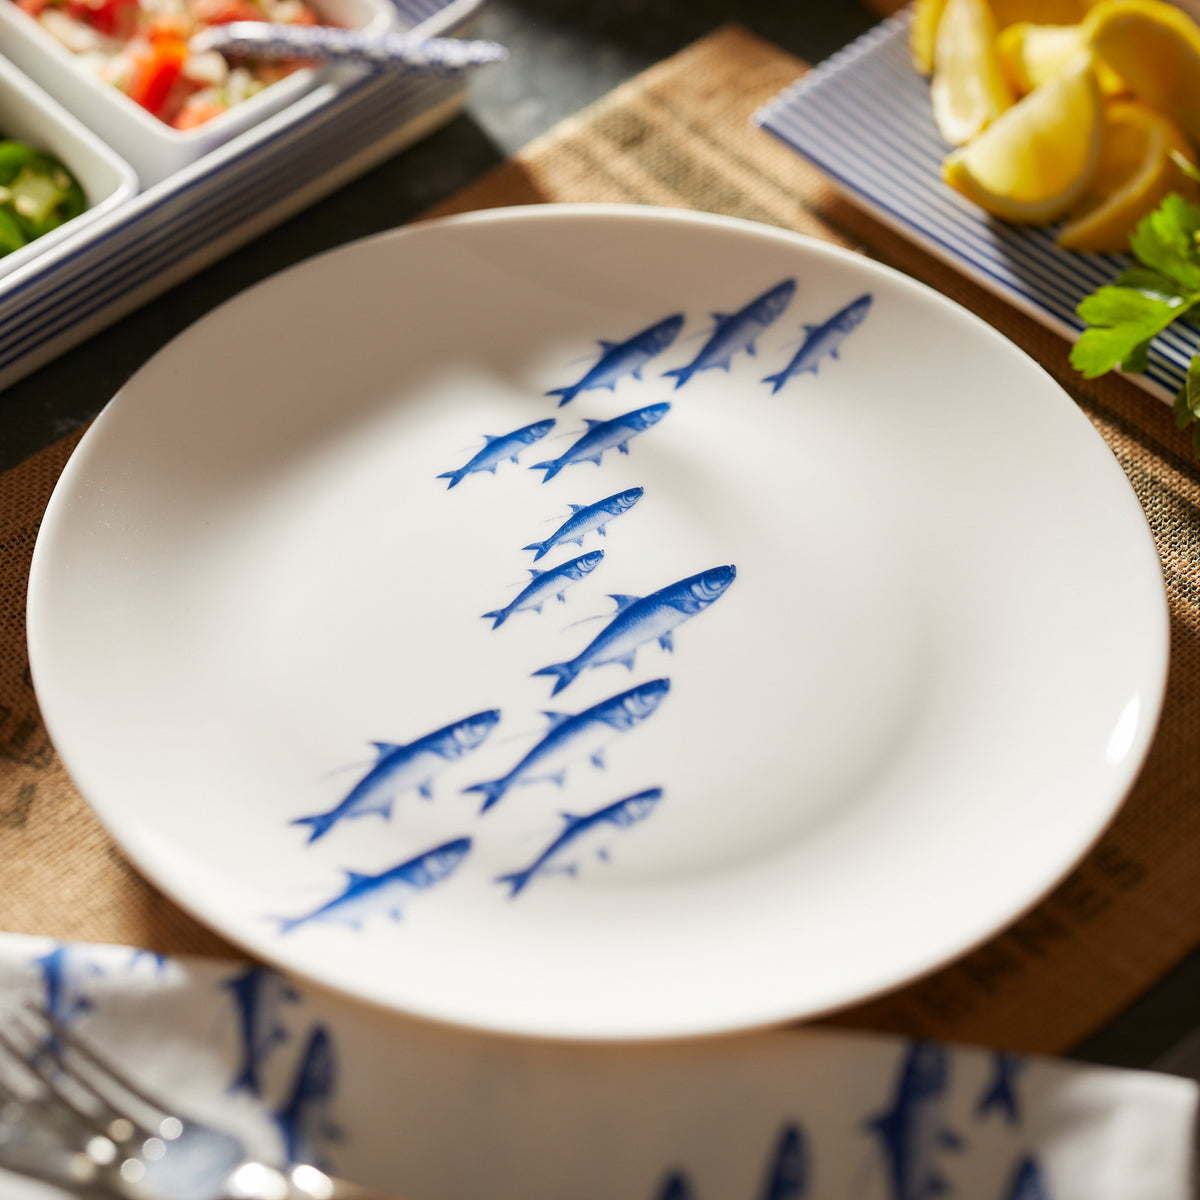 A School of Fish Coupe Dinner Plate from the Caskata Artisanal Home premium porcelain collection, surrounded by condiments and lemon wedges on a wooden table.